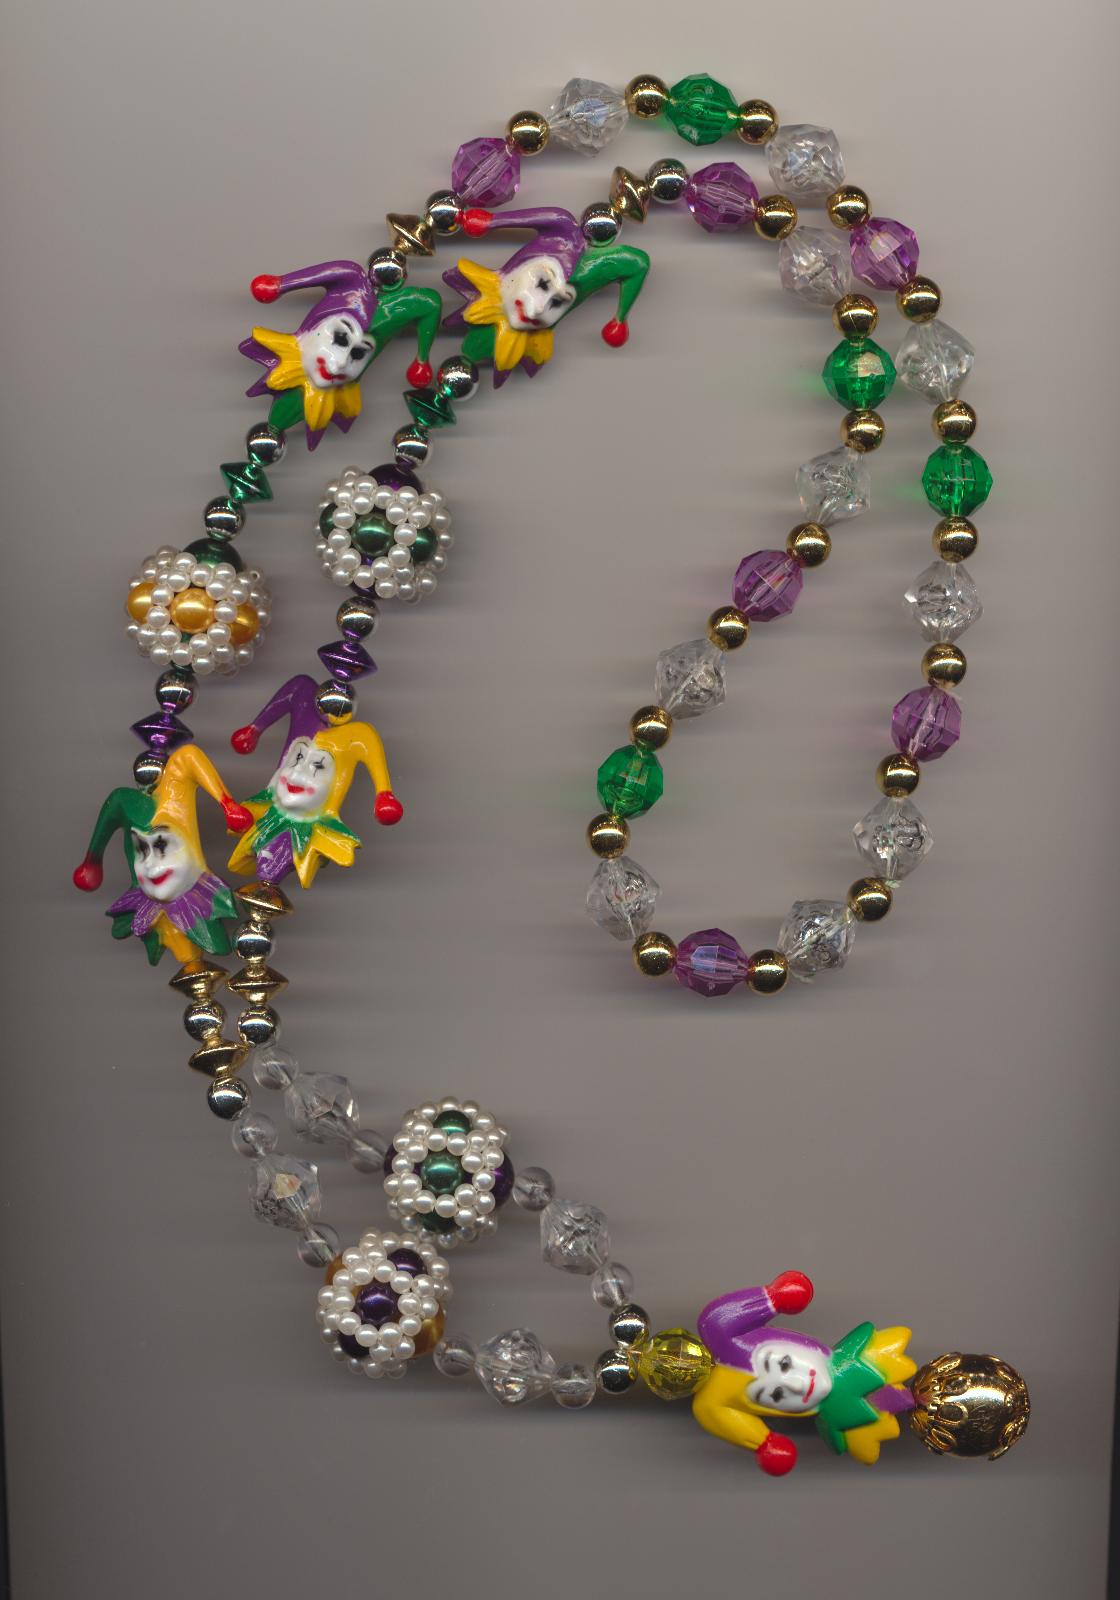 Richly beaded jester necklace made of plastic beads in the traditional Mardi Gras colors of purple, green, gold, Mardi Gras Parade 1996, New Orleans, length 37'' 94cm.